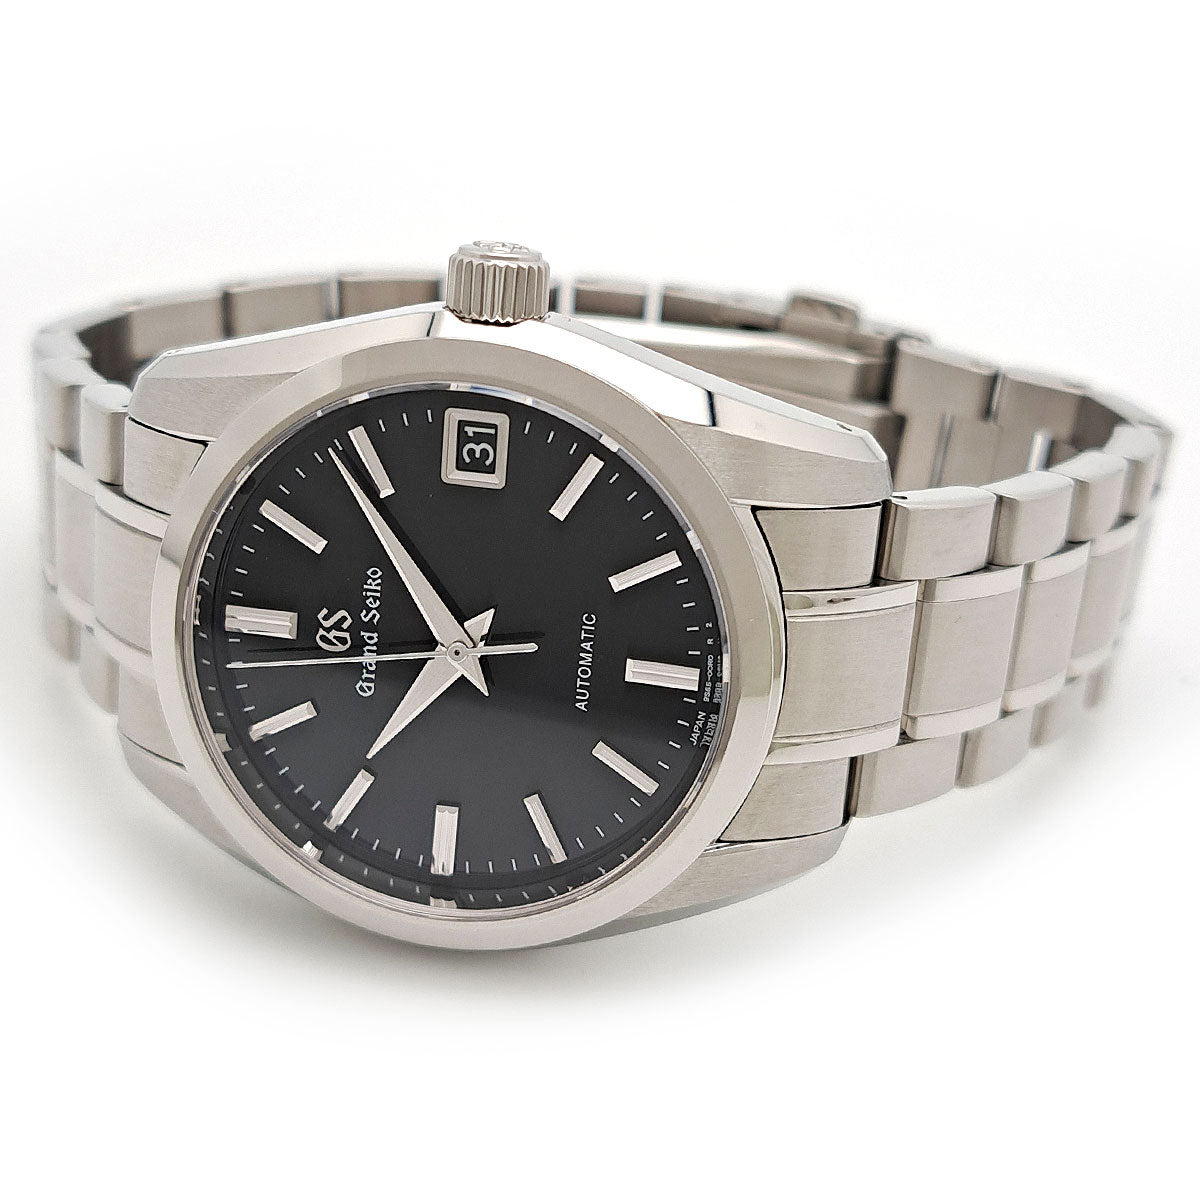 Seiko Grand Seiko Mechanical SBGR253 Automatic Watch, Stainless Steel, Men's (Pre-owned) SBGR253